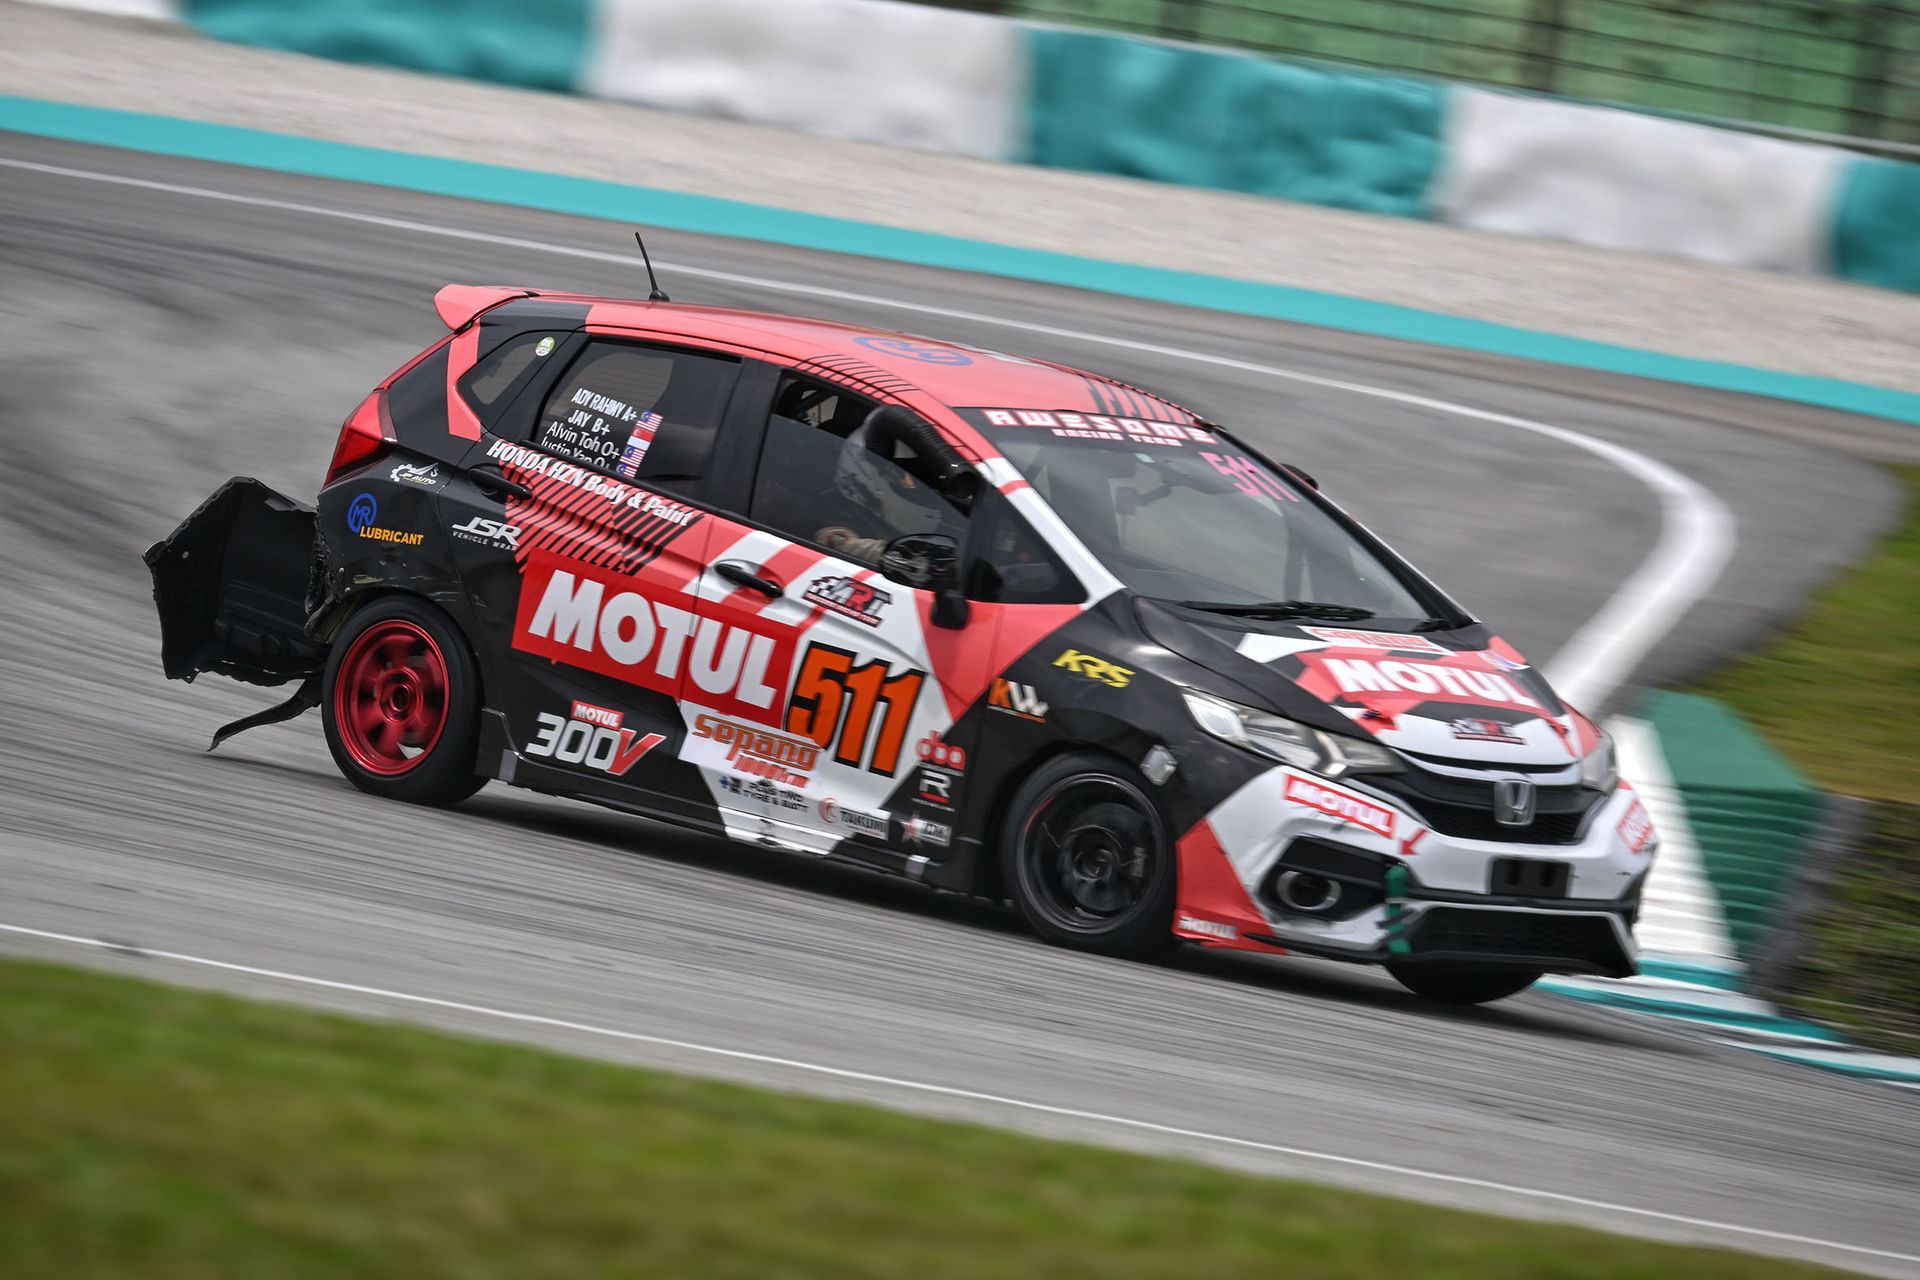 The No. 511 Honda Jazz of Team Awesome Racing hurtling on, even after its rear bumper was damaged.